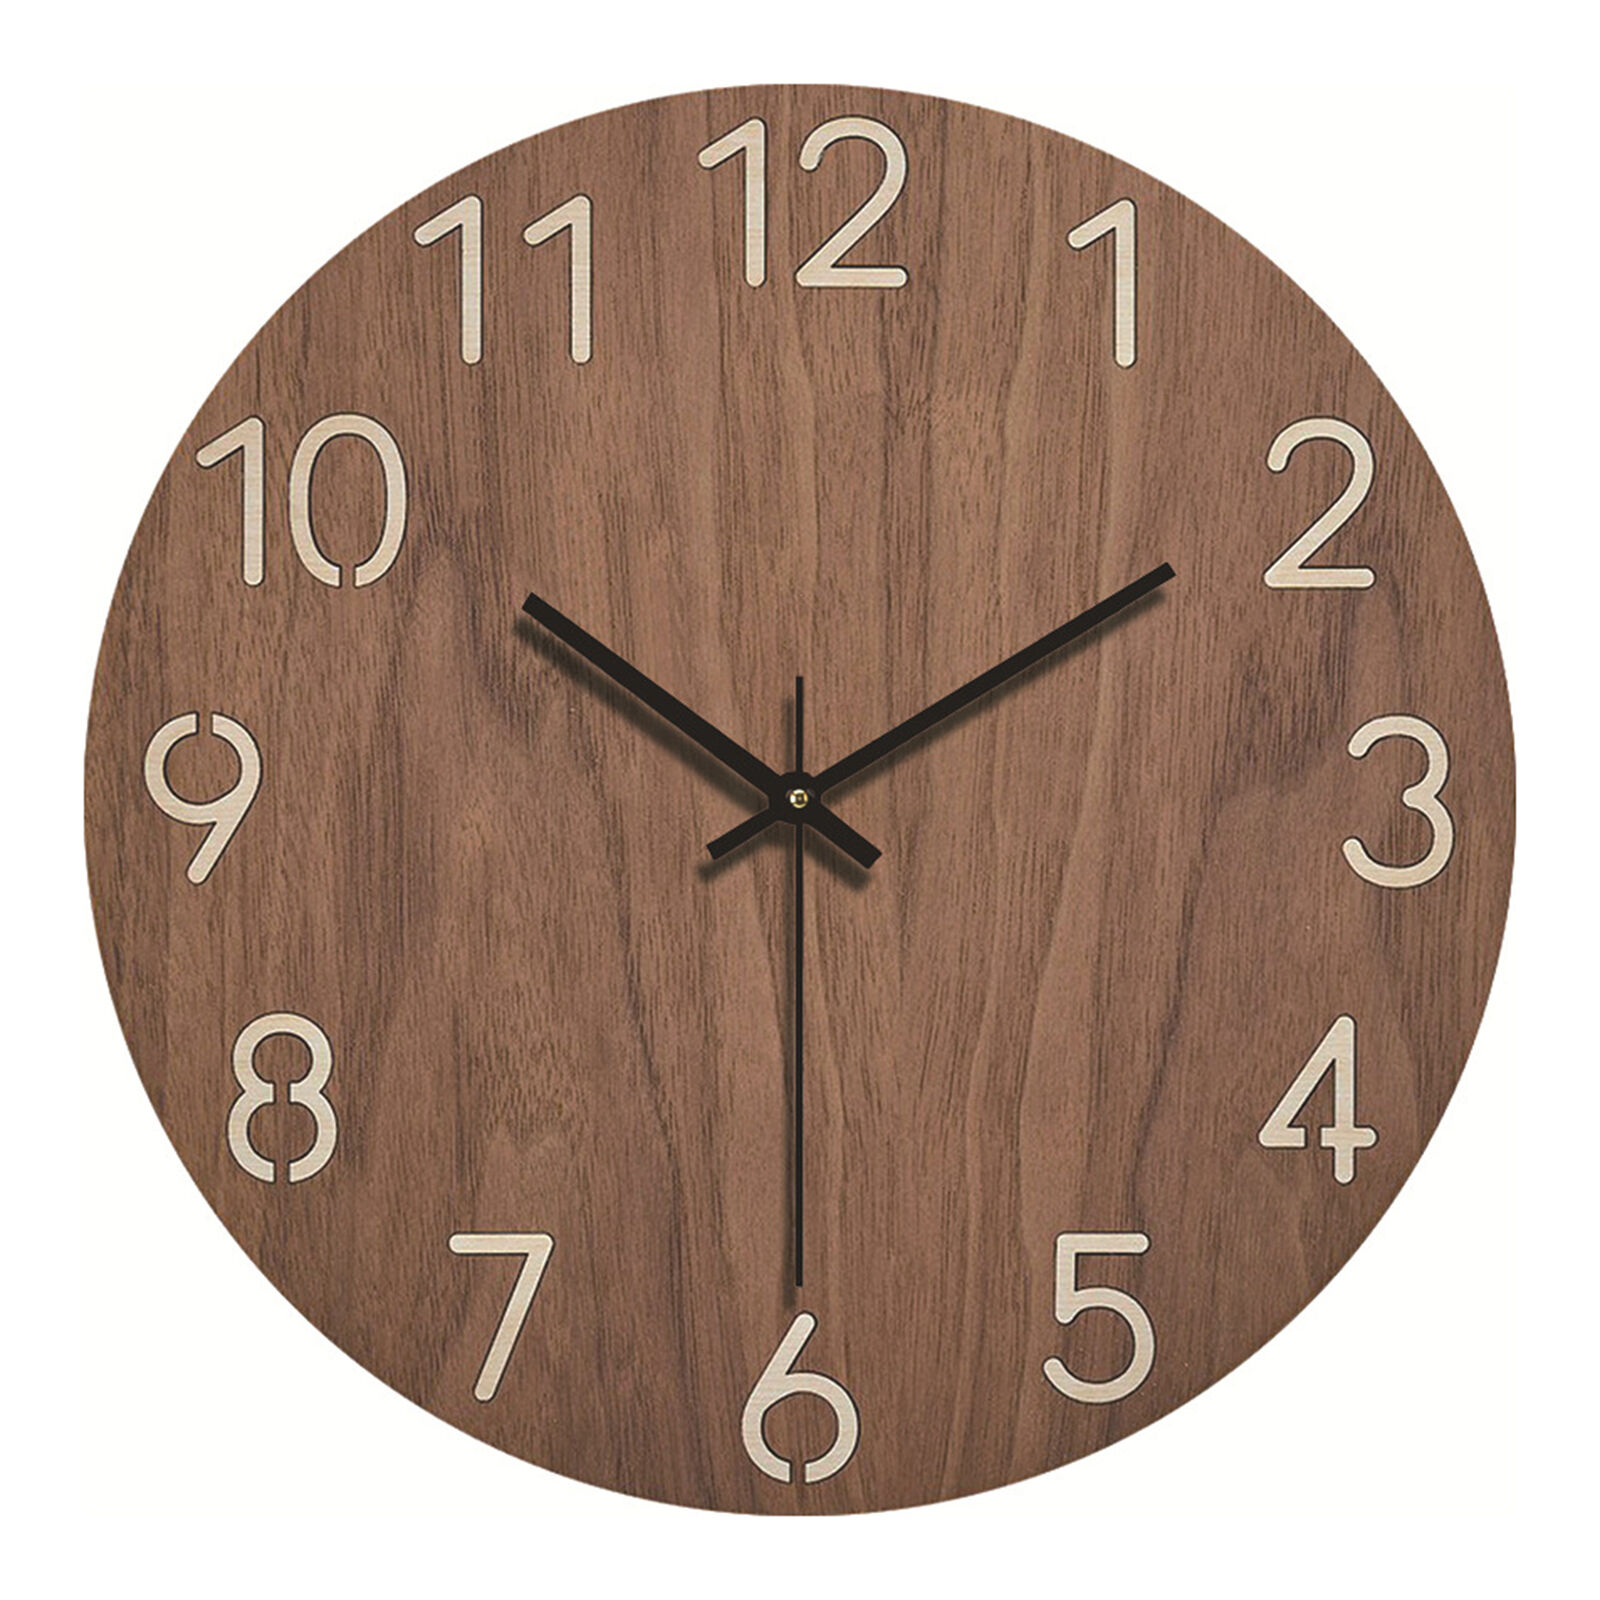 Silent Wooden Wall Clock Wood Vintage Rustic Grain for Home Decoration Office